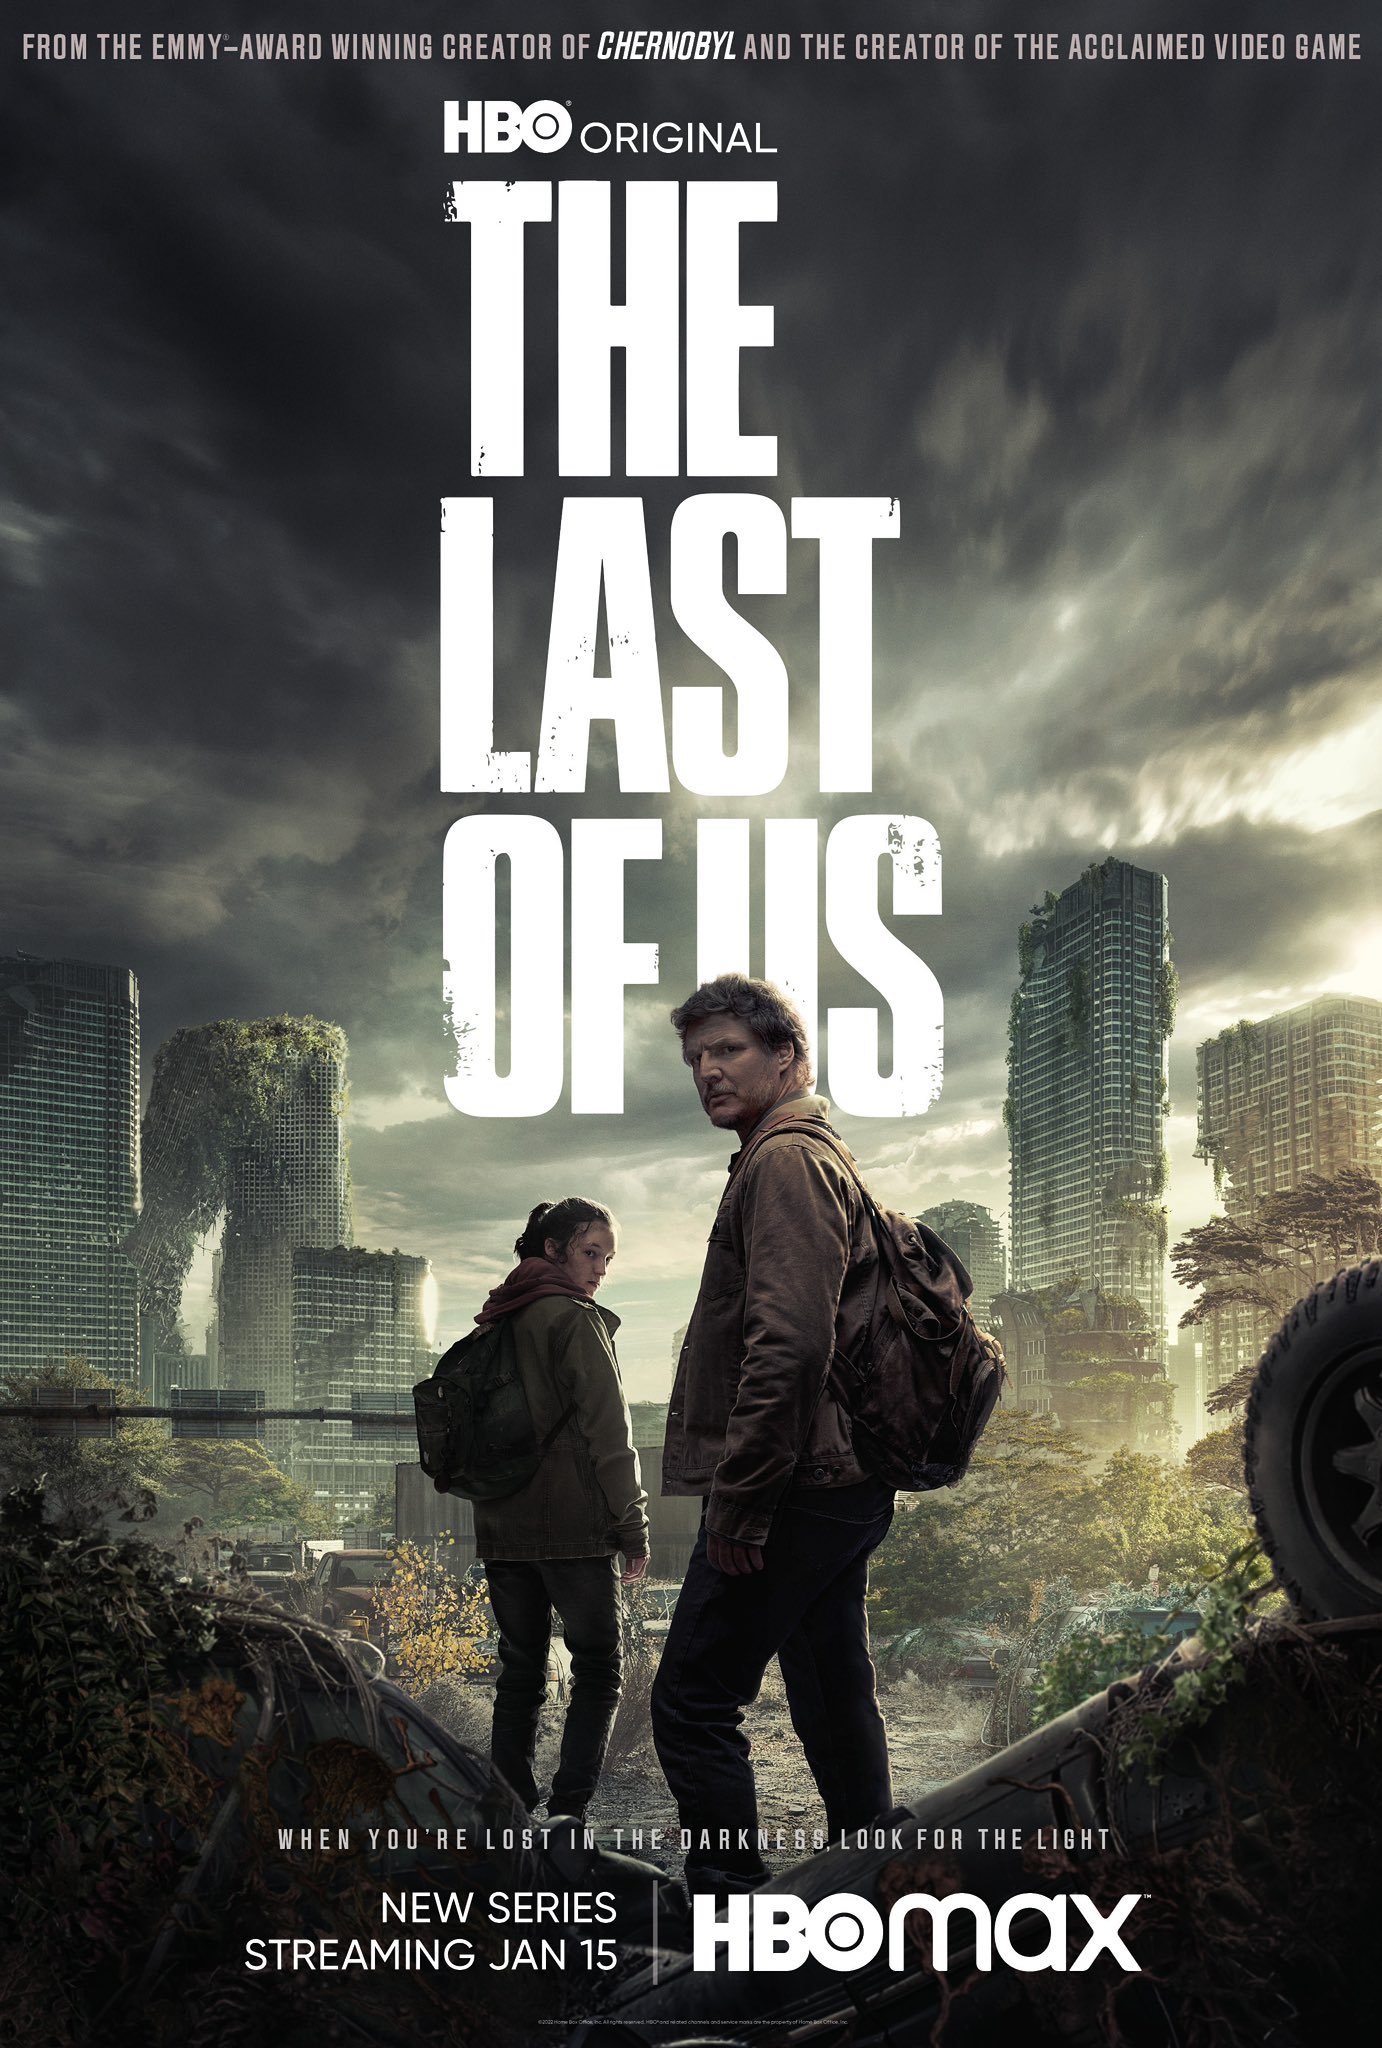 Naughty Dog Info 🐾 on X: The Last of Us EP1 is currently rated a 9.5/10  on IMDb and has a 96% audience score on Rotten Tomatoes. This episode is  phenomenal I